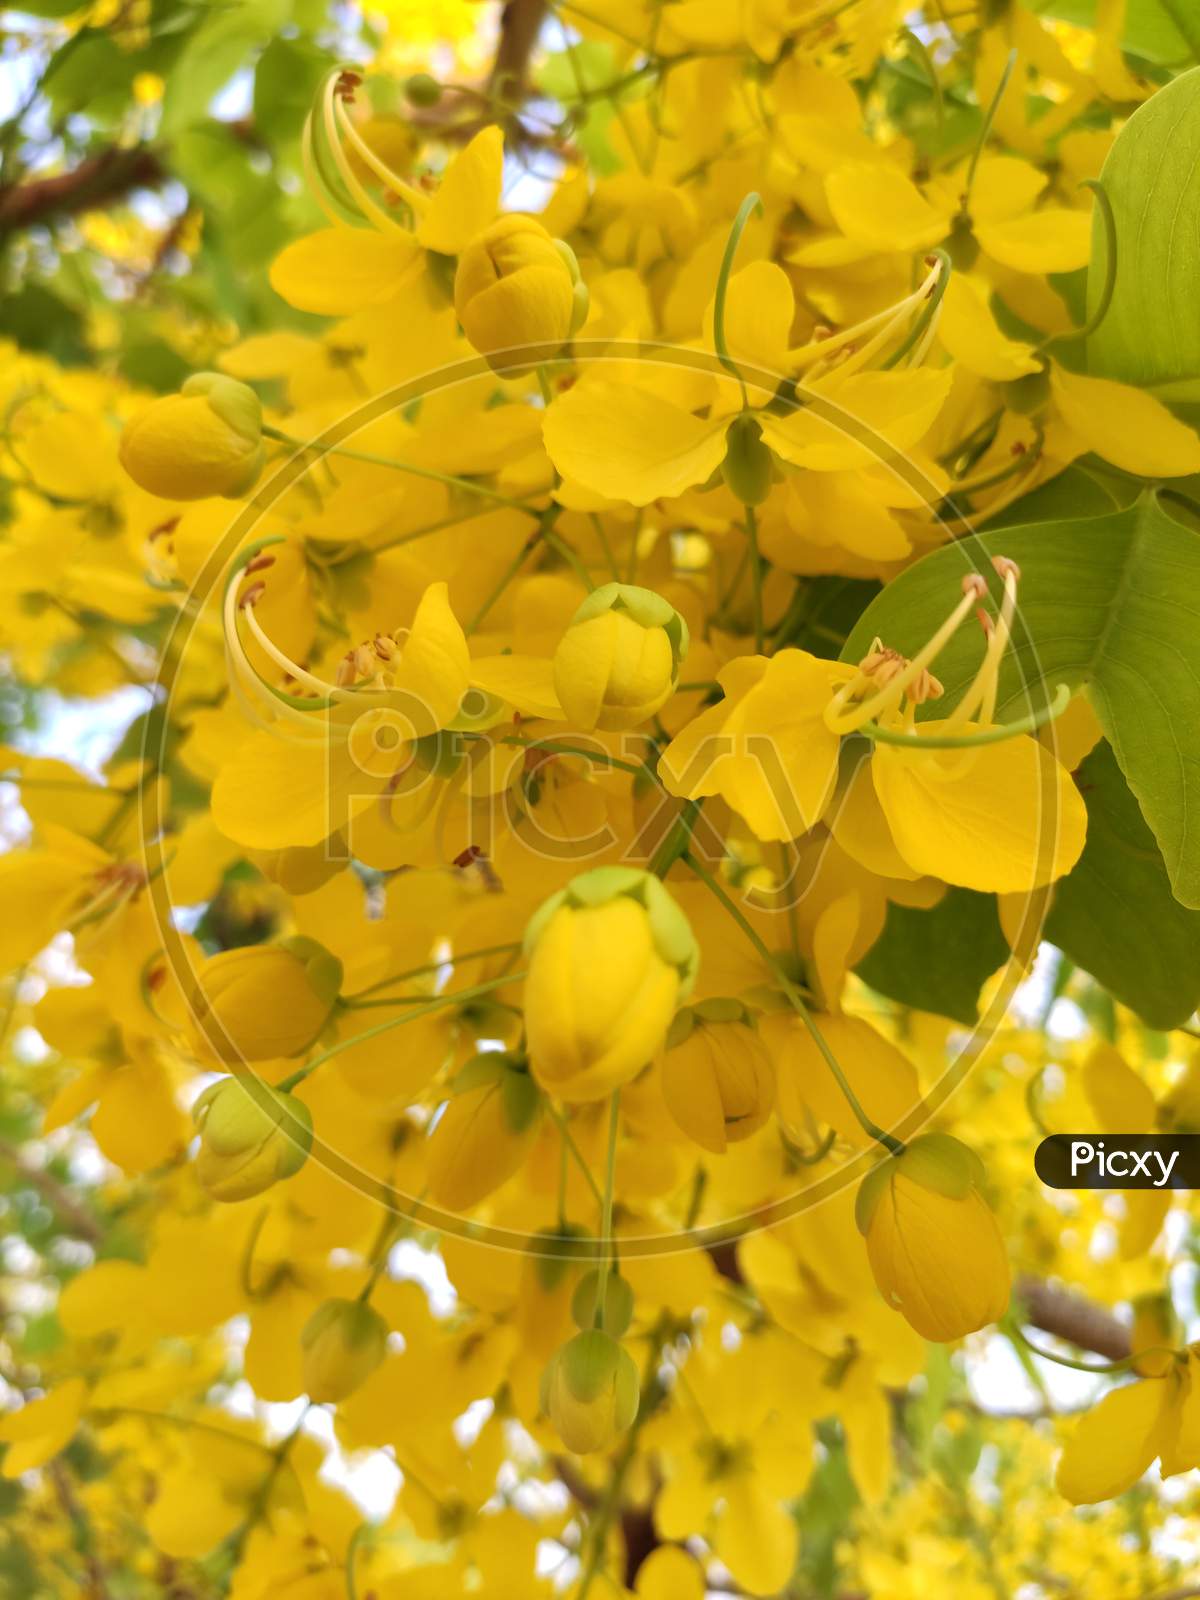 Cassia fistula commonly known as golden showers